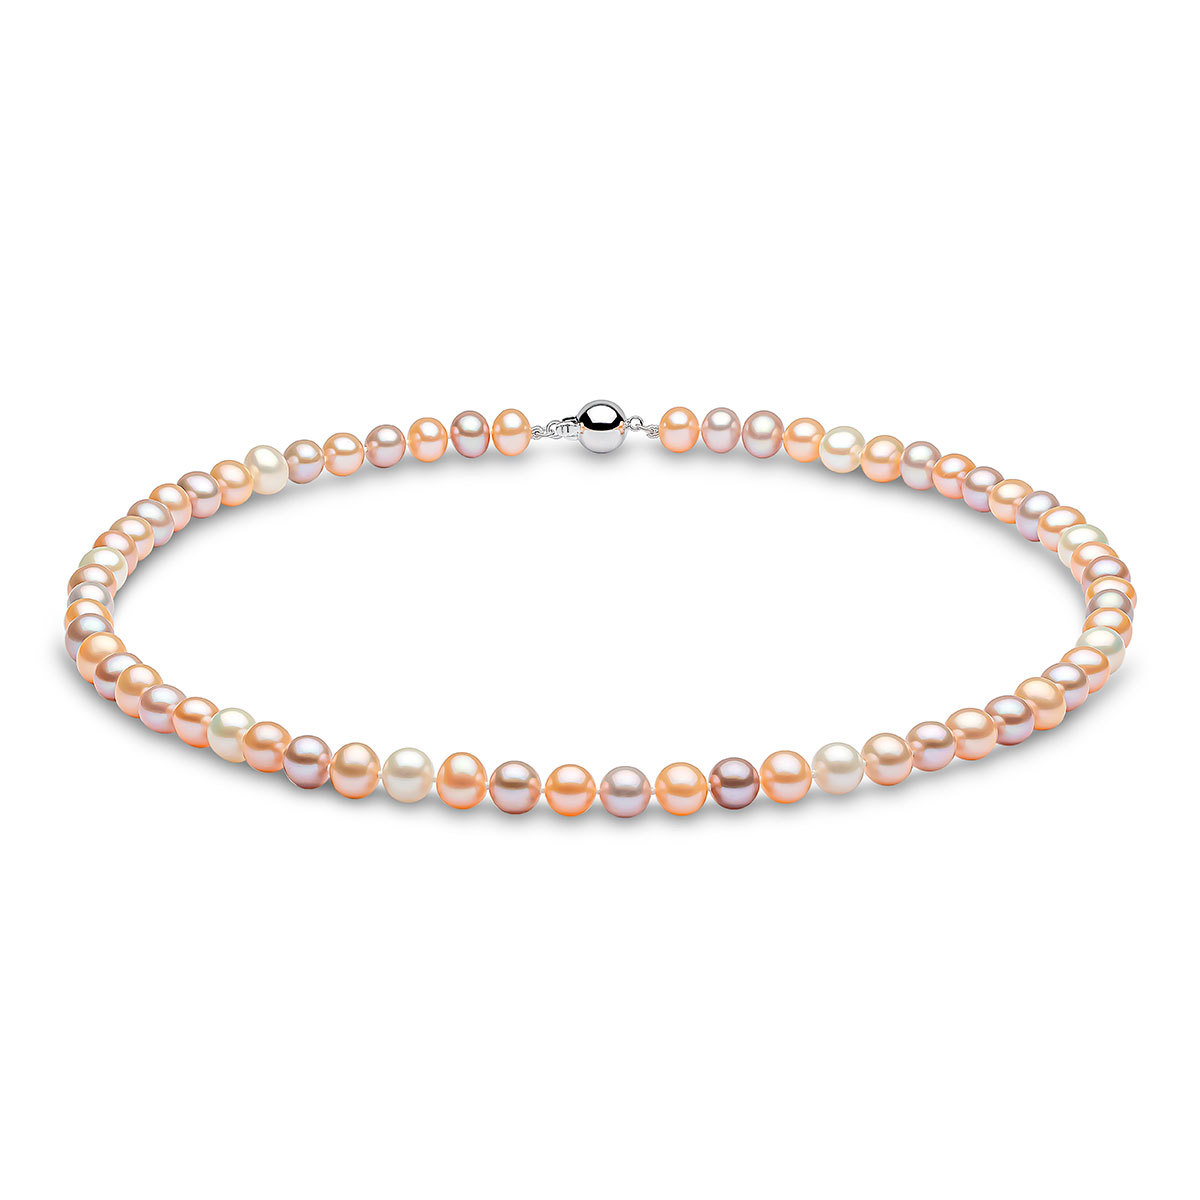 6-6.5mm Cultured Freshwater Multi Colour Pearl Necklace, 18ct White Gold